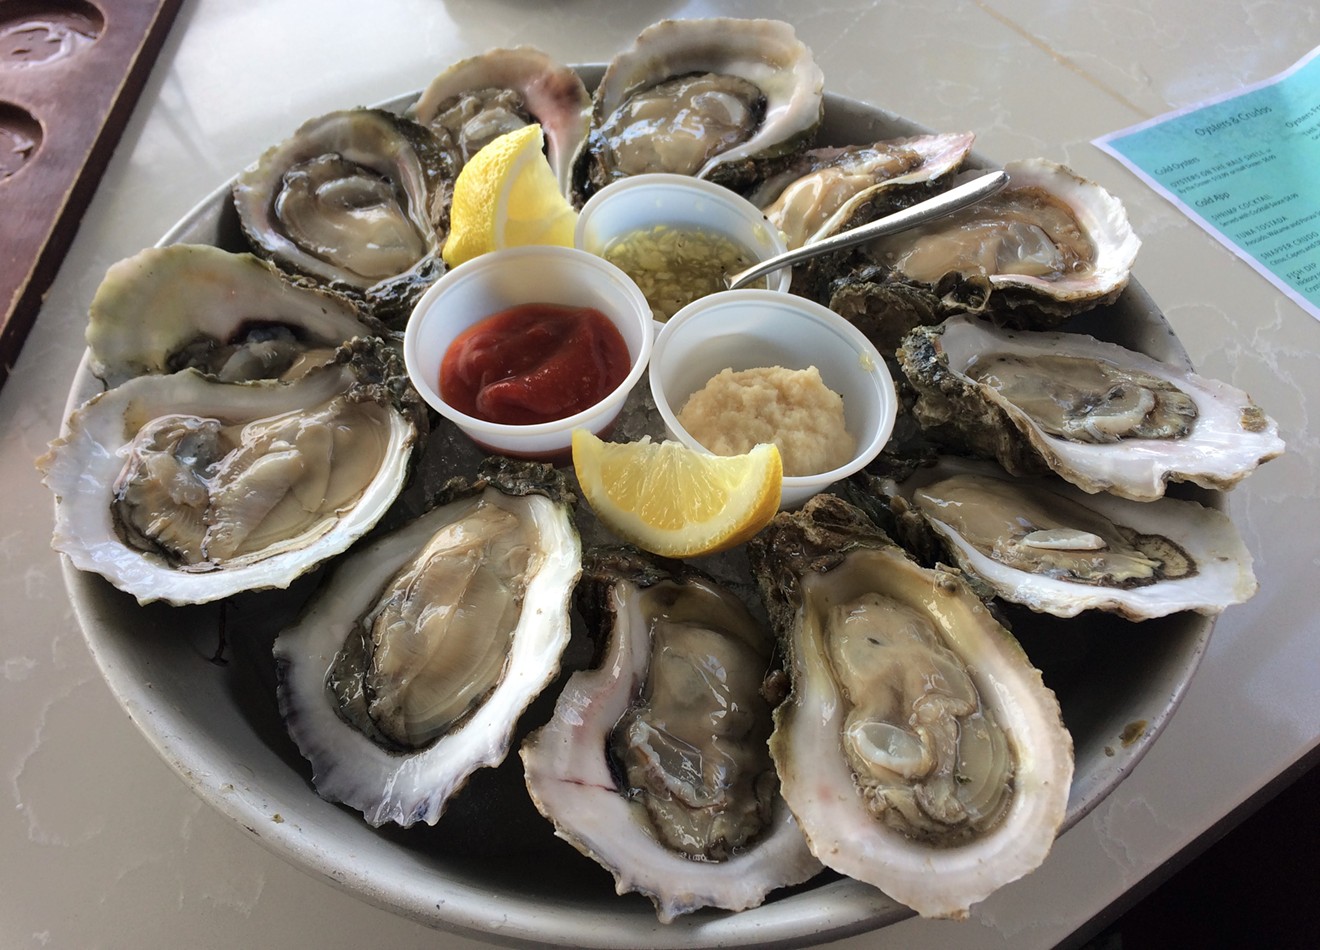 Pier 6 has super fresh oysters.